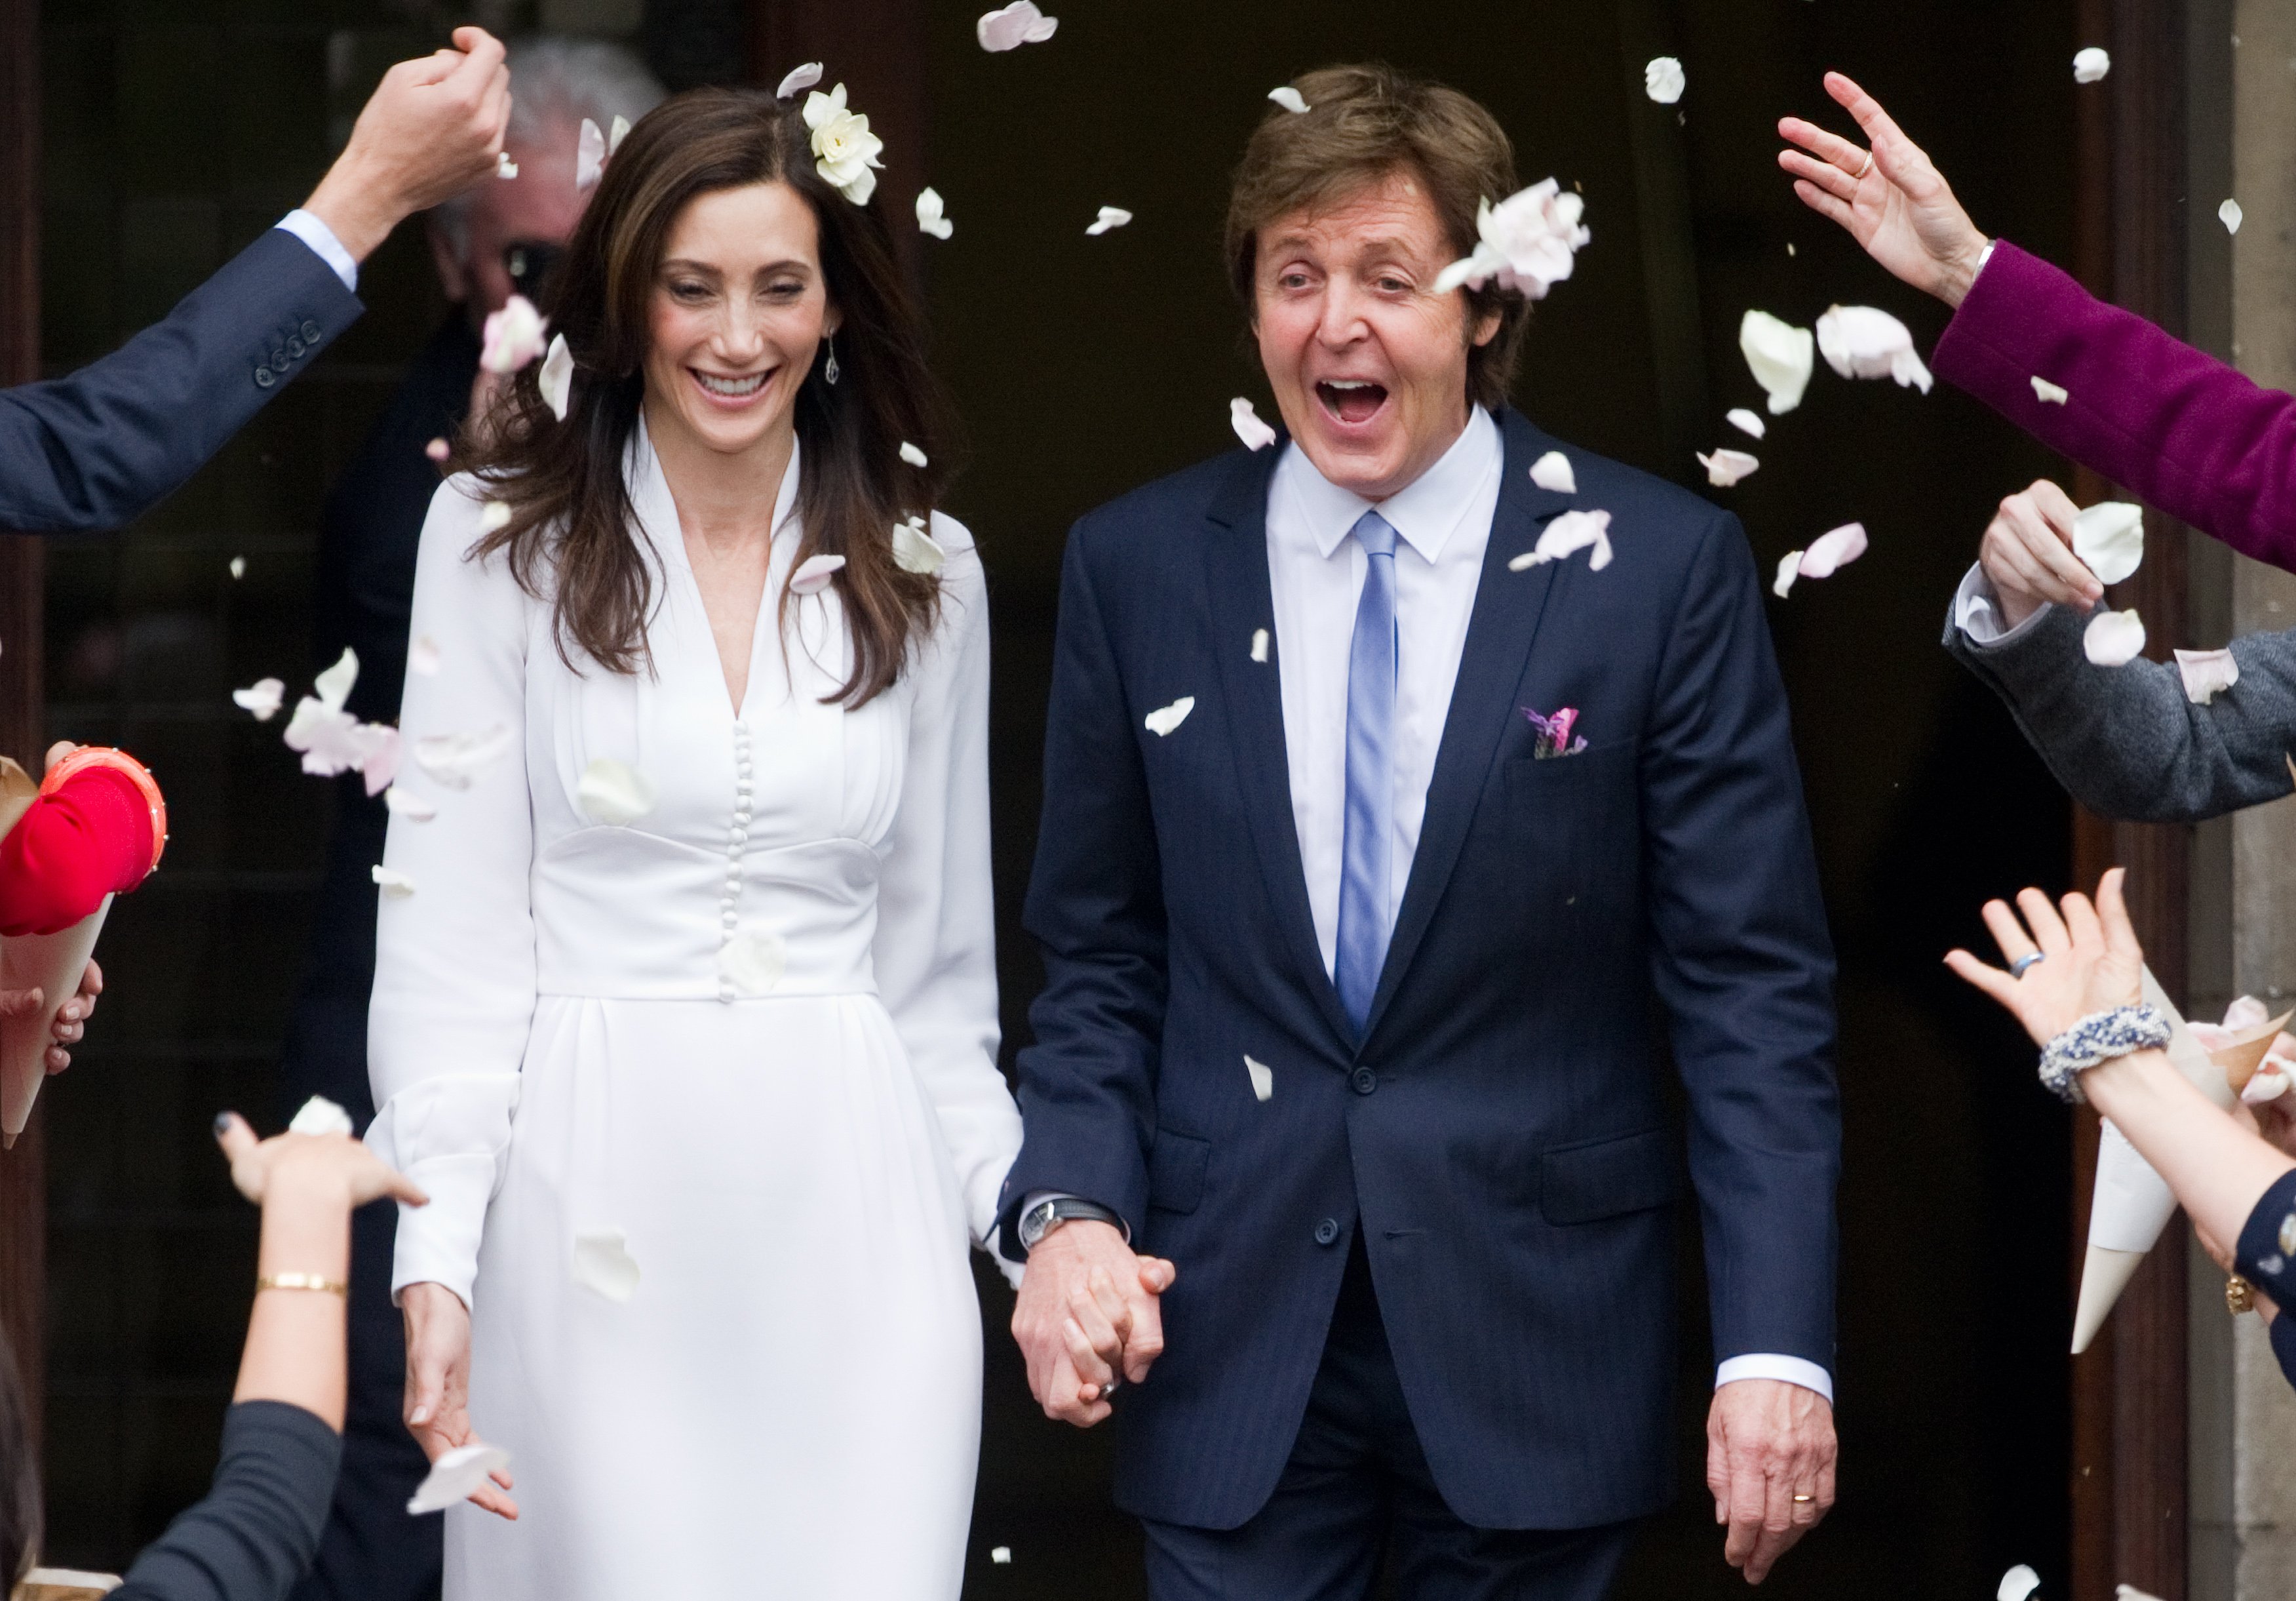 Sir Paul McCartney and his wife Nancy Shevell in central London after their wedding on October 9, 2011. | Source: Getty Images